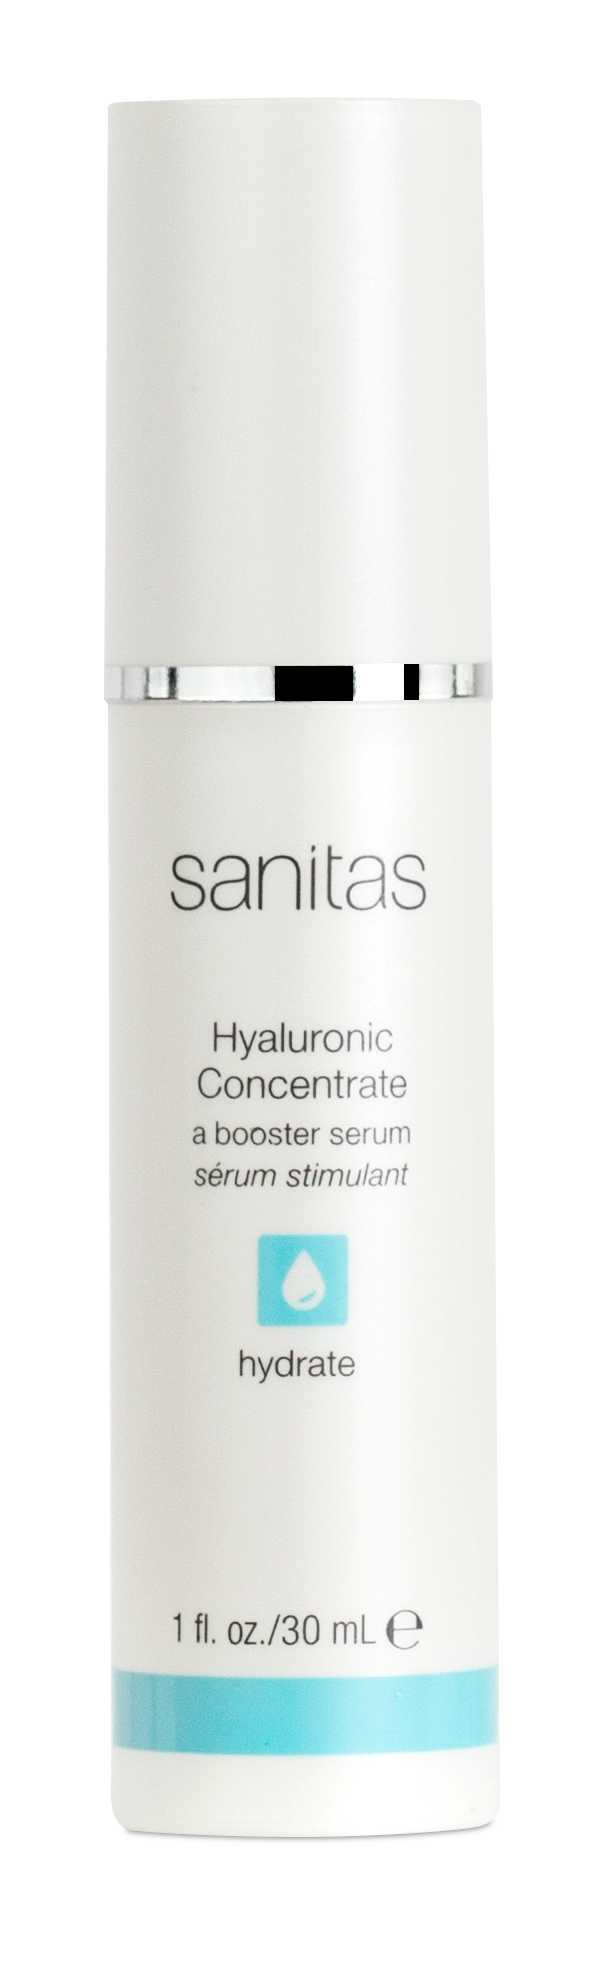 Hyaluronic Concentrate Serum